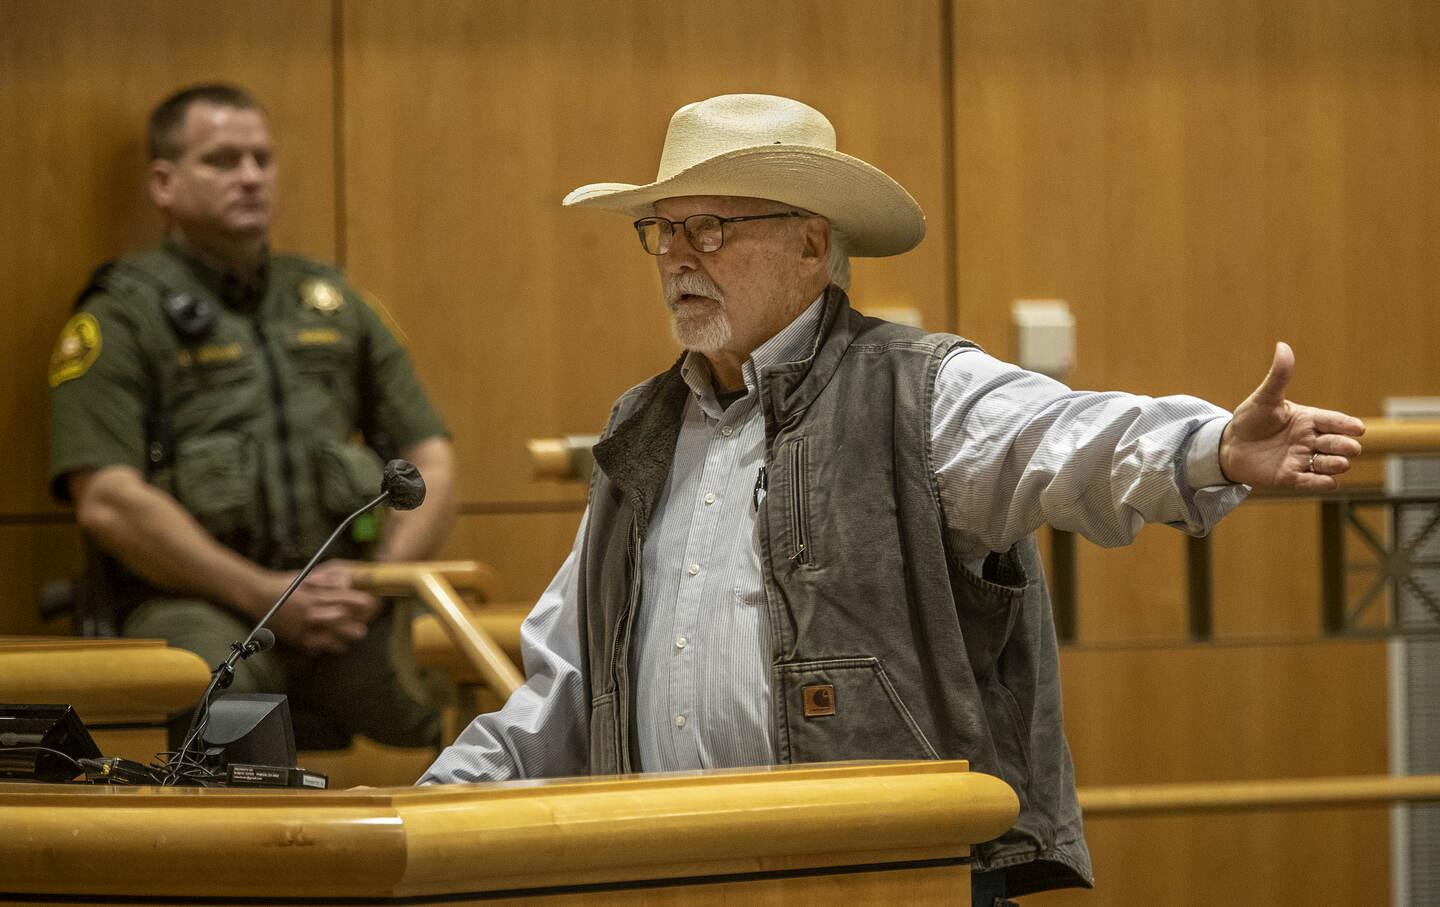 Shasta County resident Ronald Plumb, 71, addresses the Shasta County Board of Supervisors about his concerns of voter fraud during the public comment period of the Boards regular meeting inside the Board Chambers in Redding.